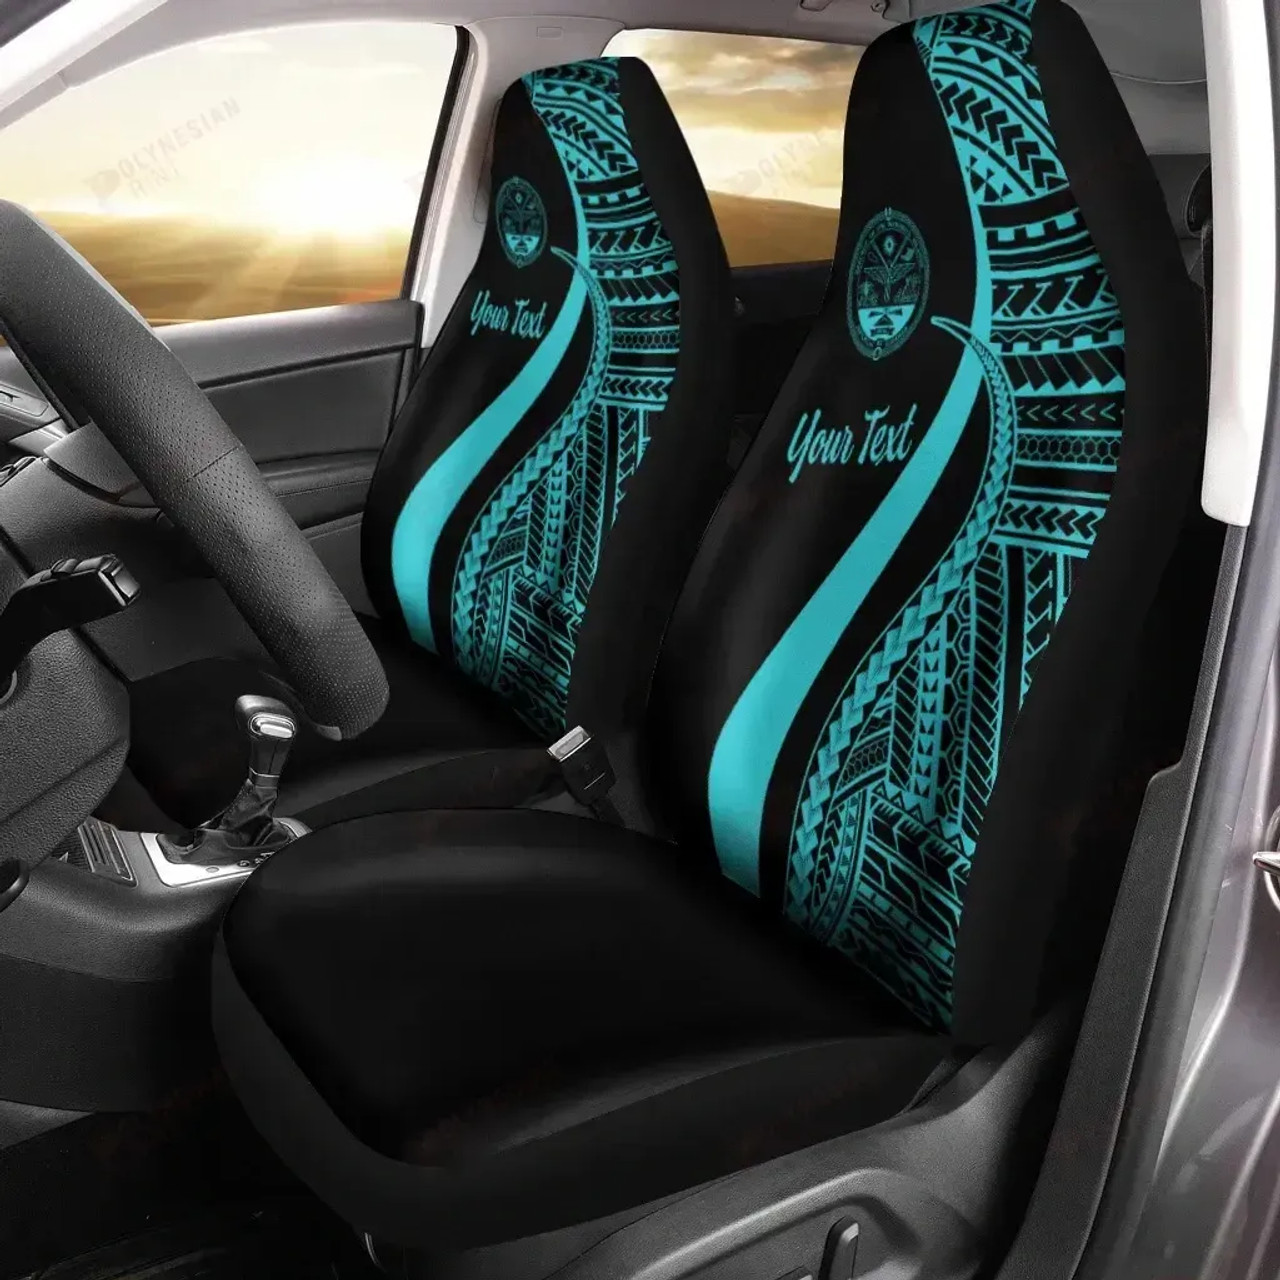 Marshall Islands Custom Personalised Car Seat Covers - Turquoise Polynesian Tentacle Tribal Pattern Crest